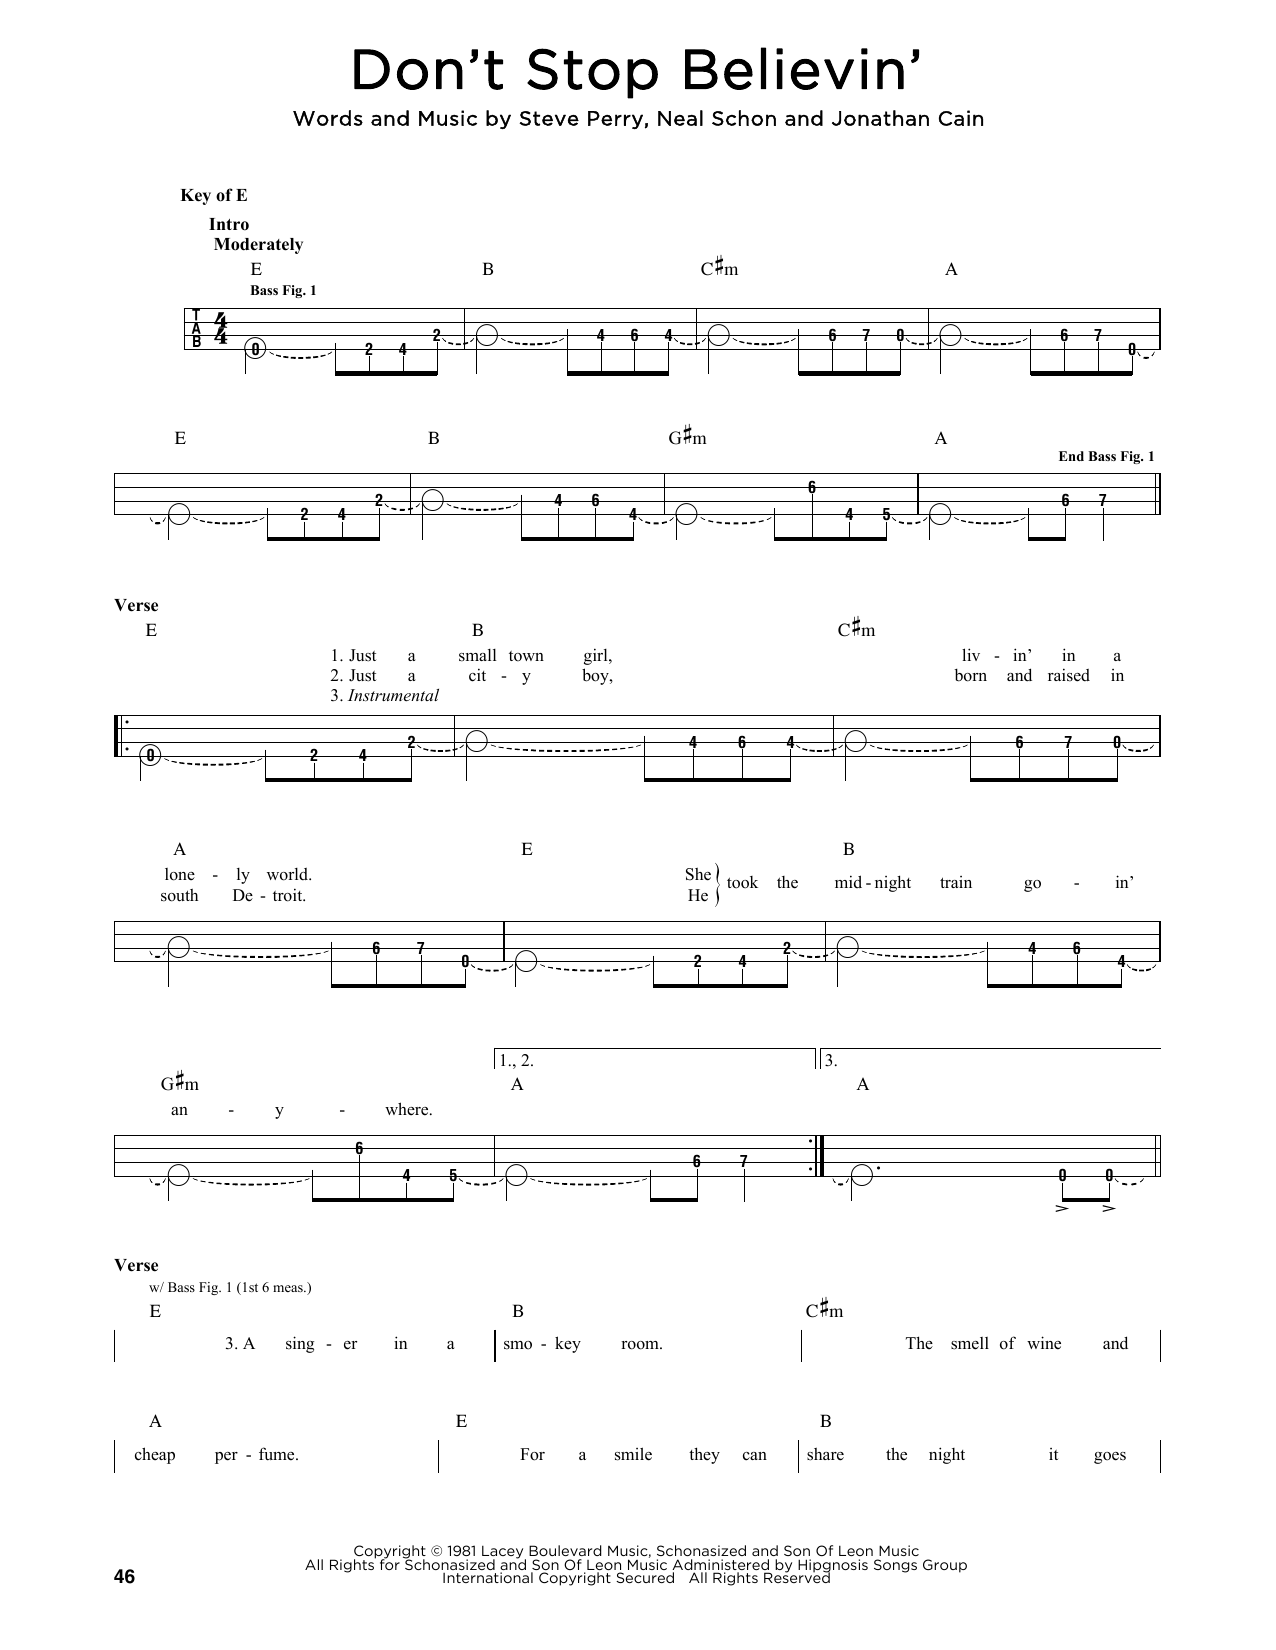 Journey Don't Stop Believin' sheet music notes printable PDF score